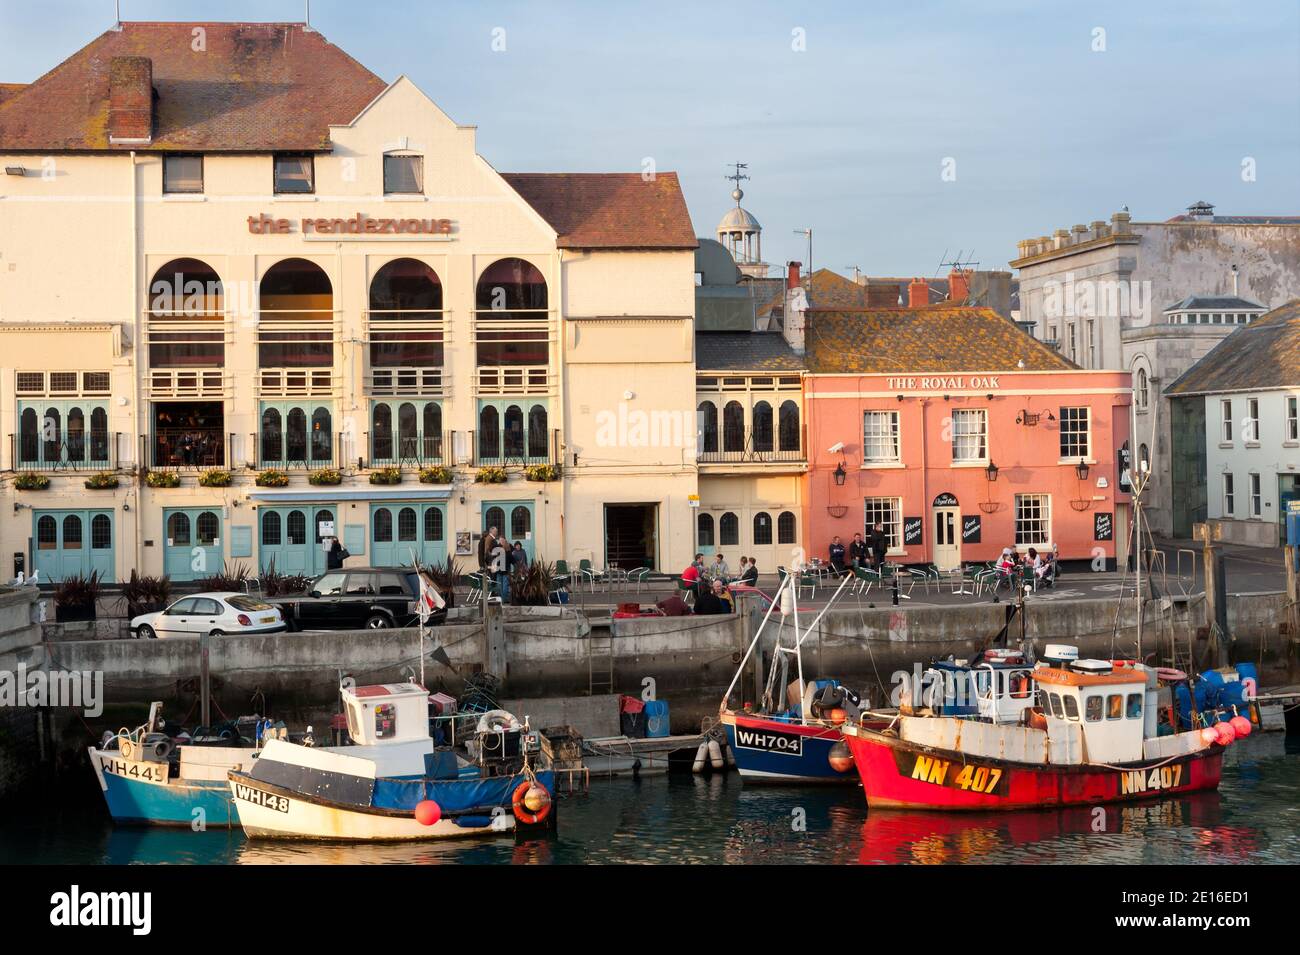 WEYMOUTH, DORSET, UK - MARCH 15, 2009:  View of the Old Harbour with the Rendezvous and Royal Oak pub in the background Stock Photo